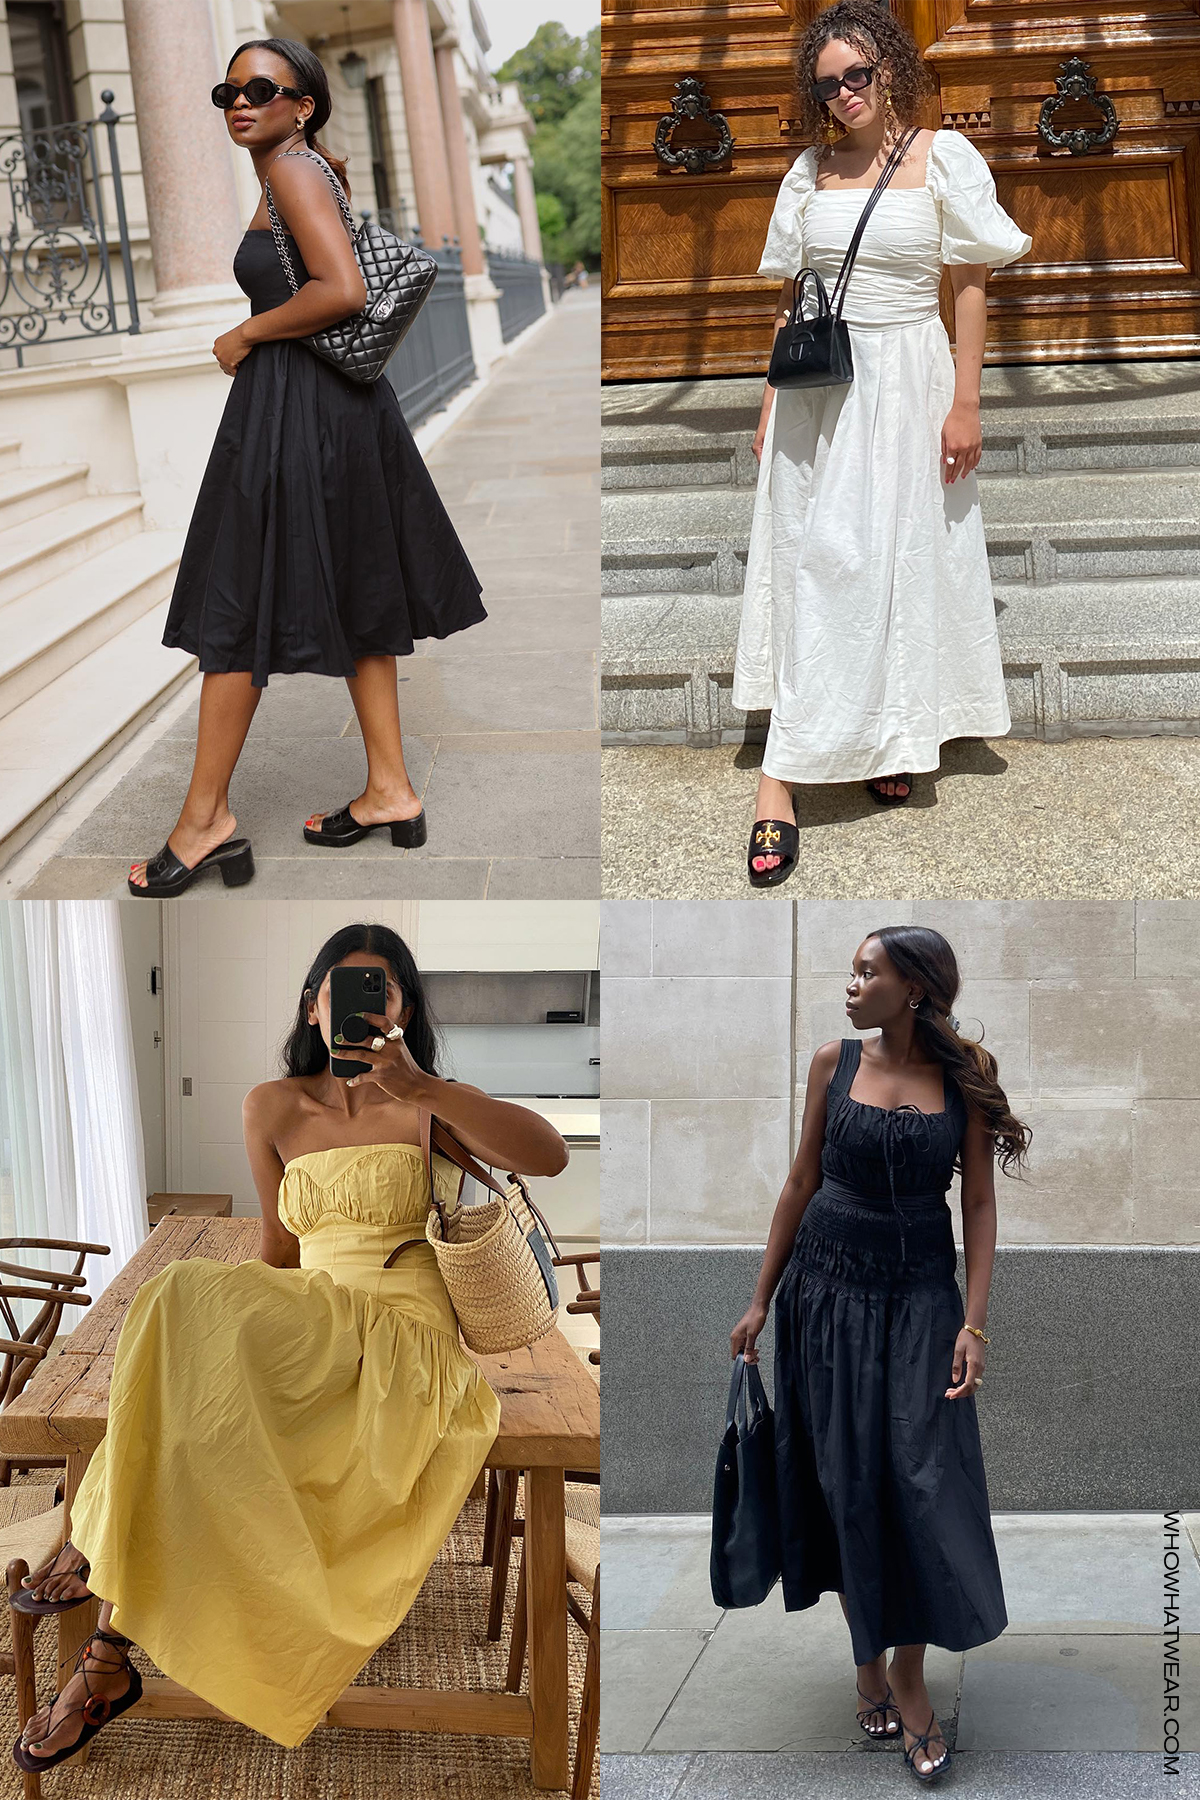 dress types and styles